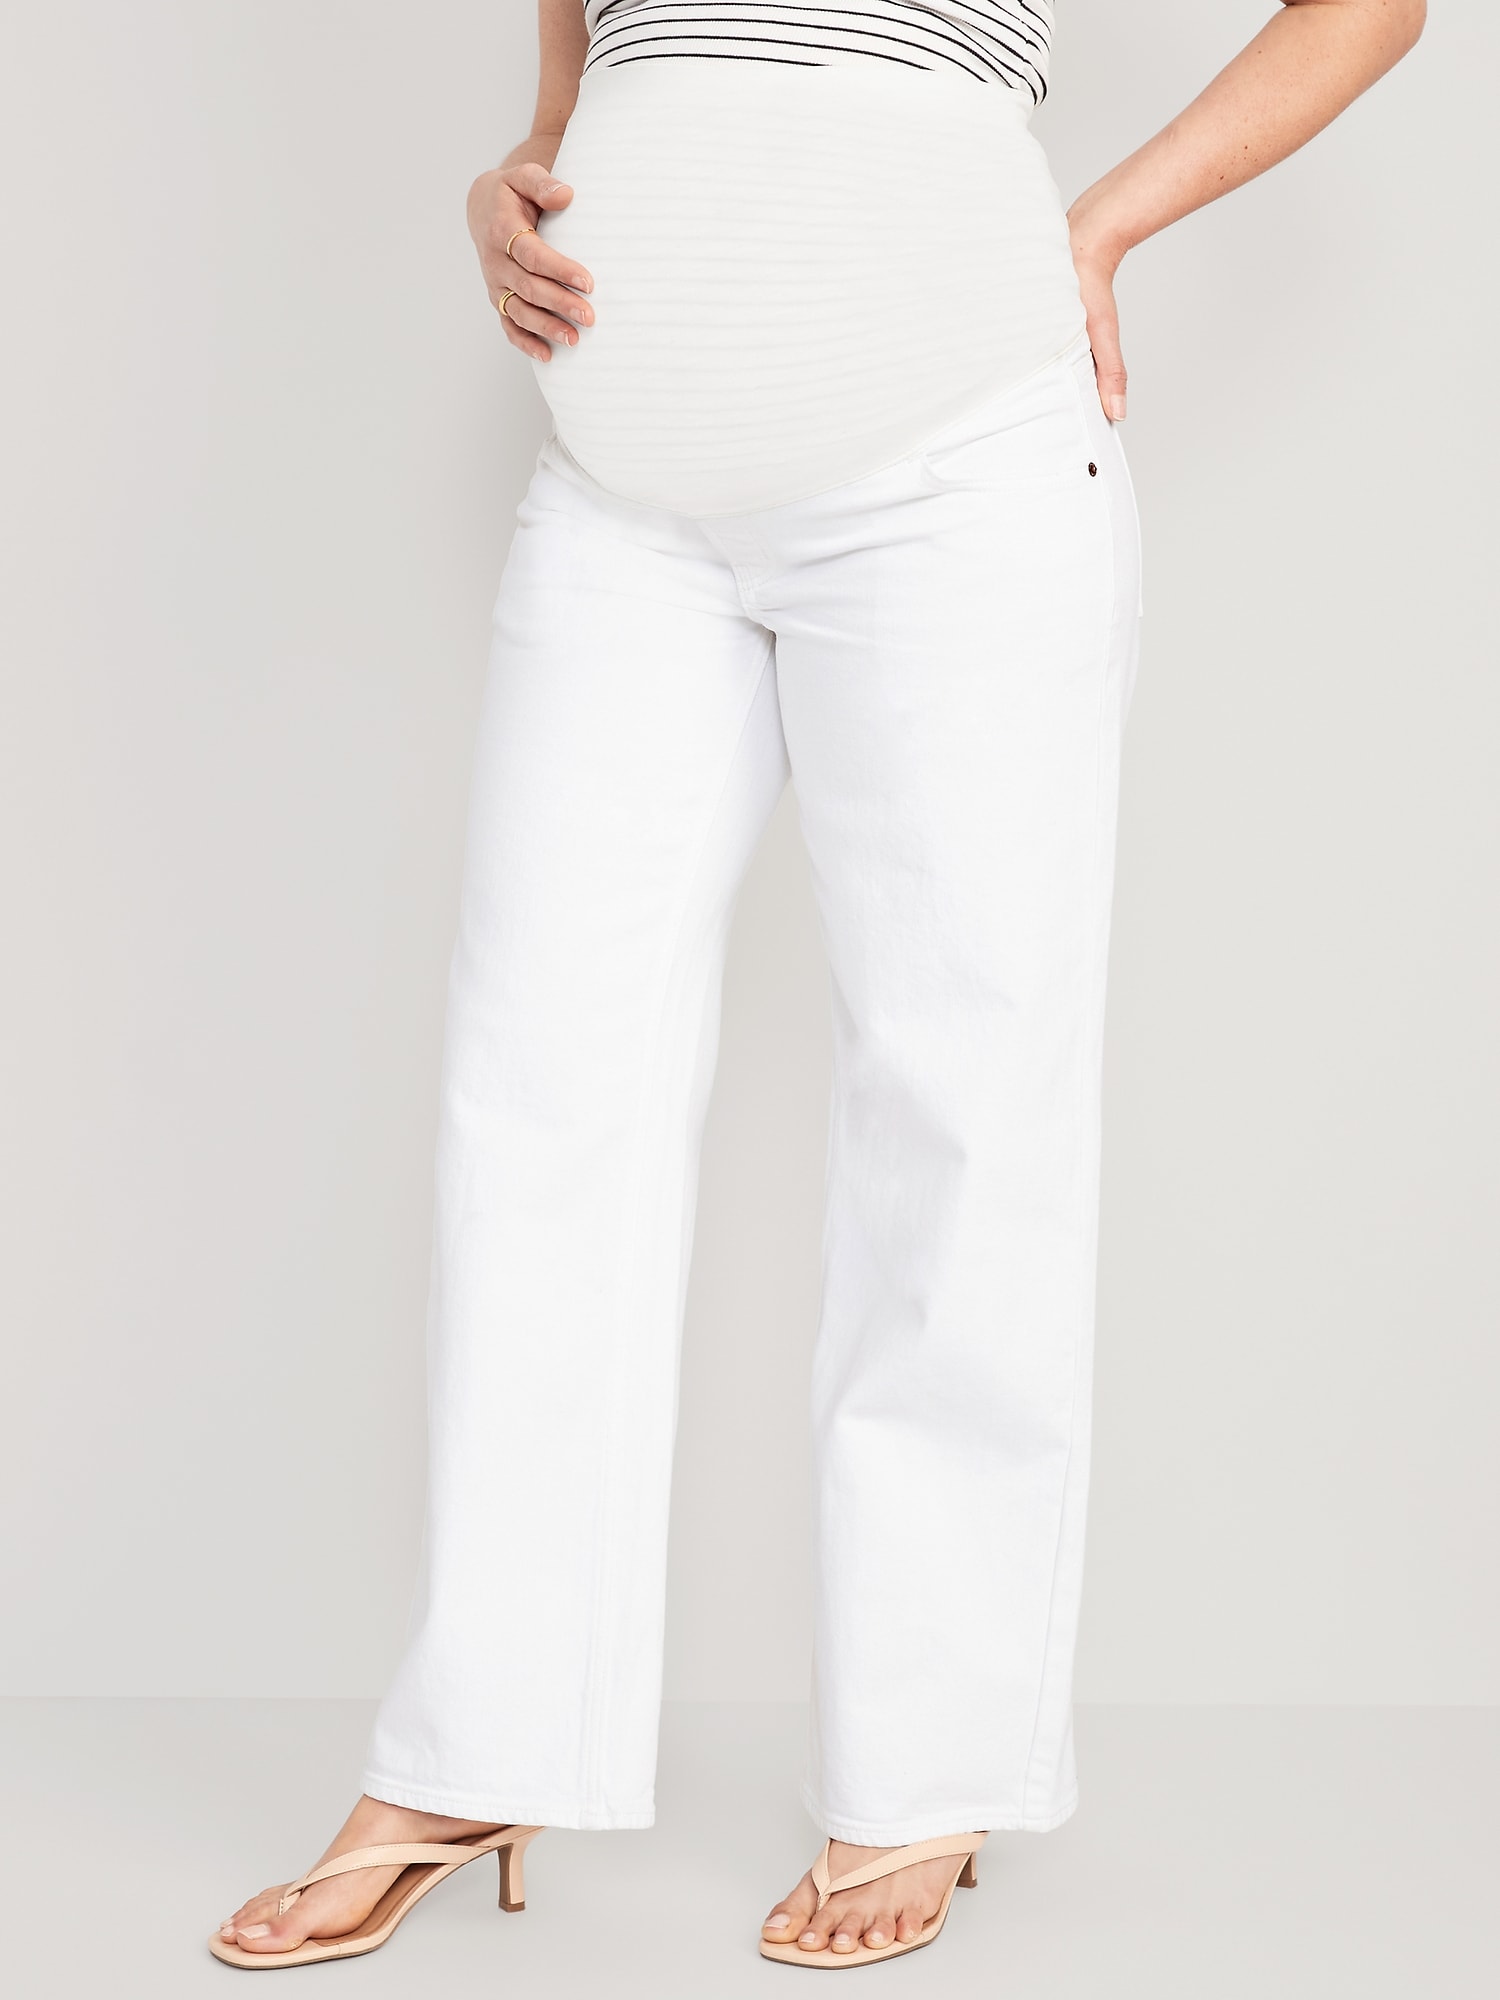 Maternity Sonoma Goods For Life® Full Belly Panel Super-Stretch Ankle Pants